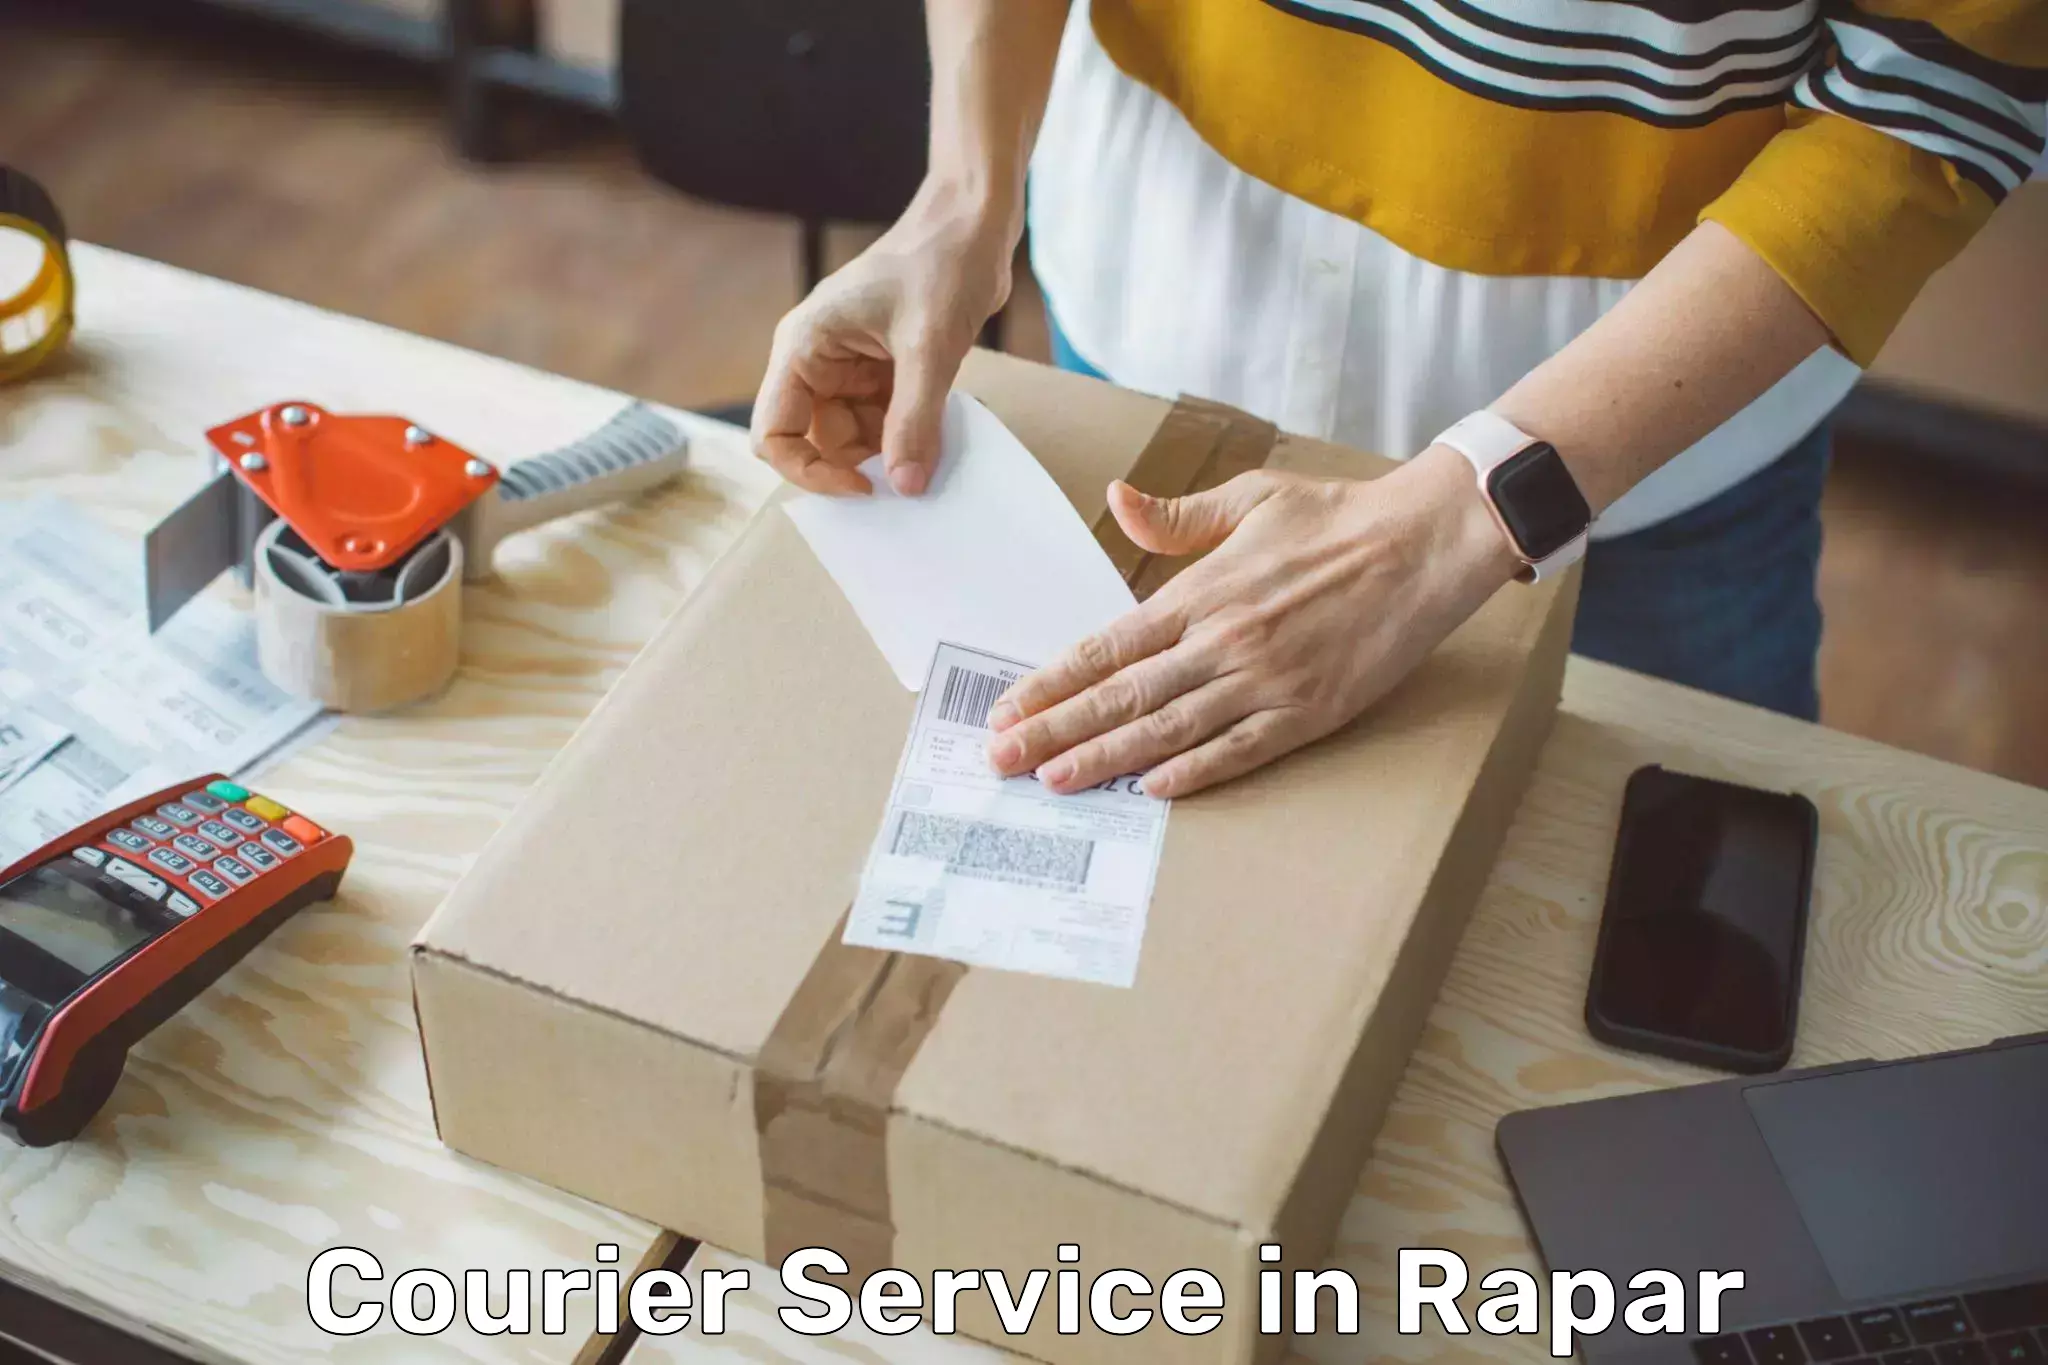 Flexible delivery scheduling in Rapar